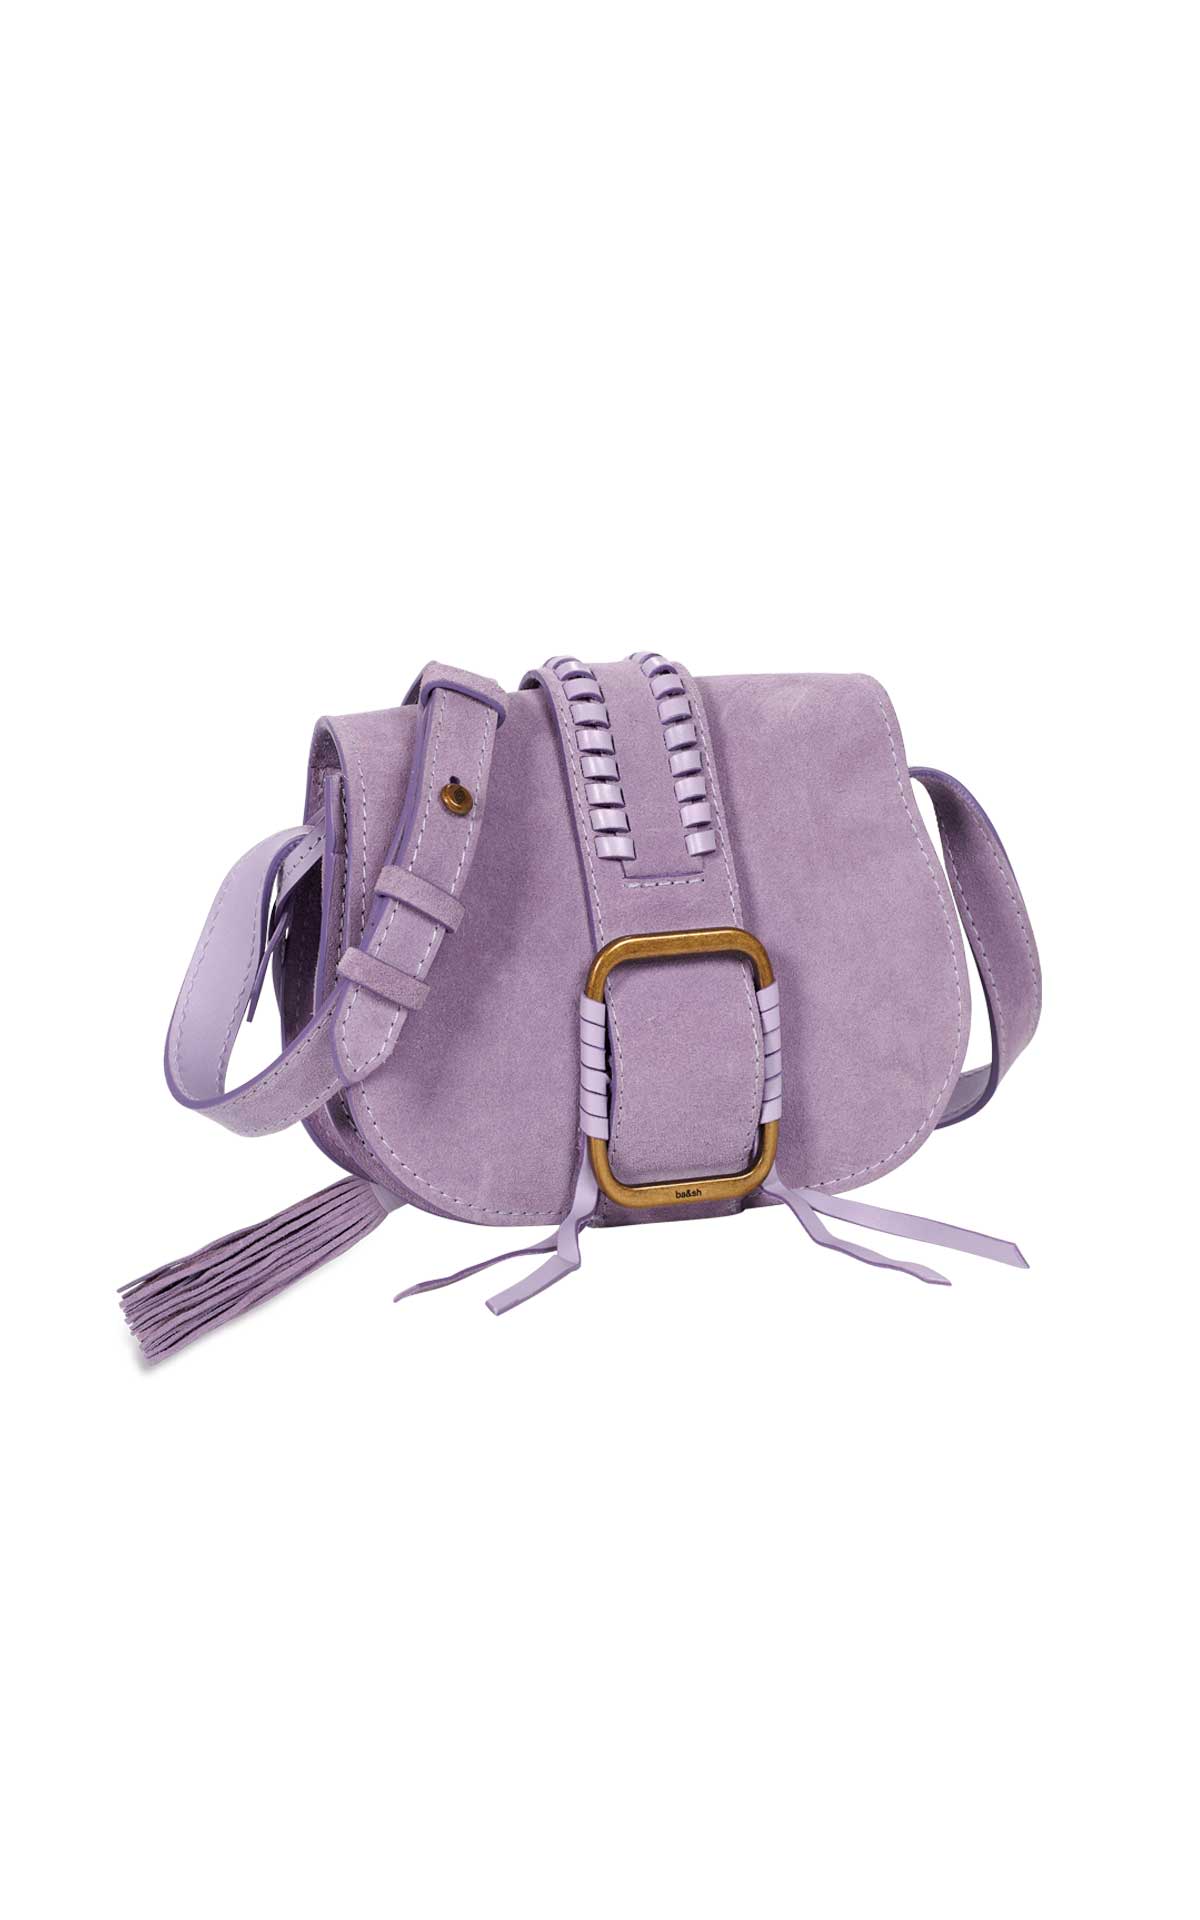 Lilac suede bag with buckle ba&sh